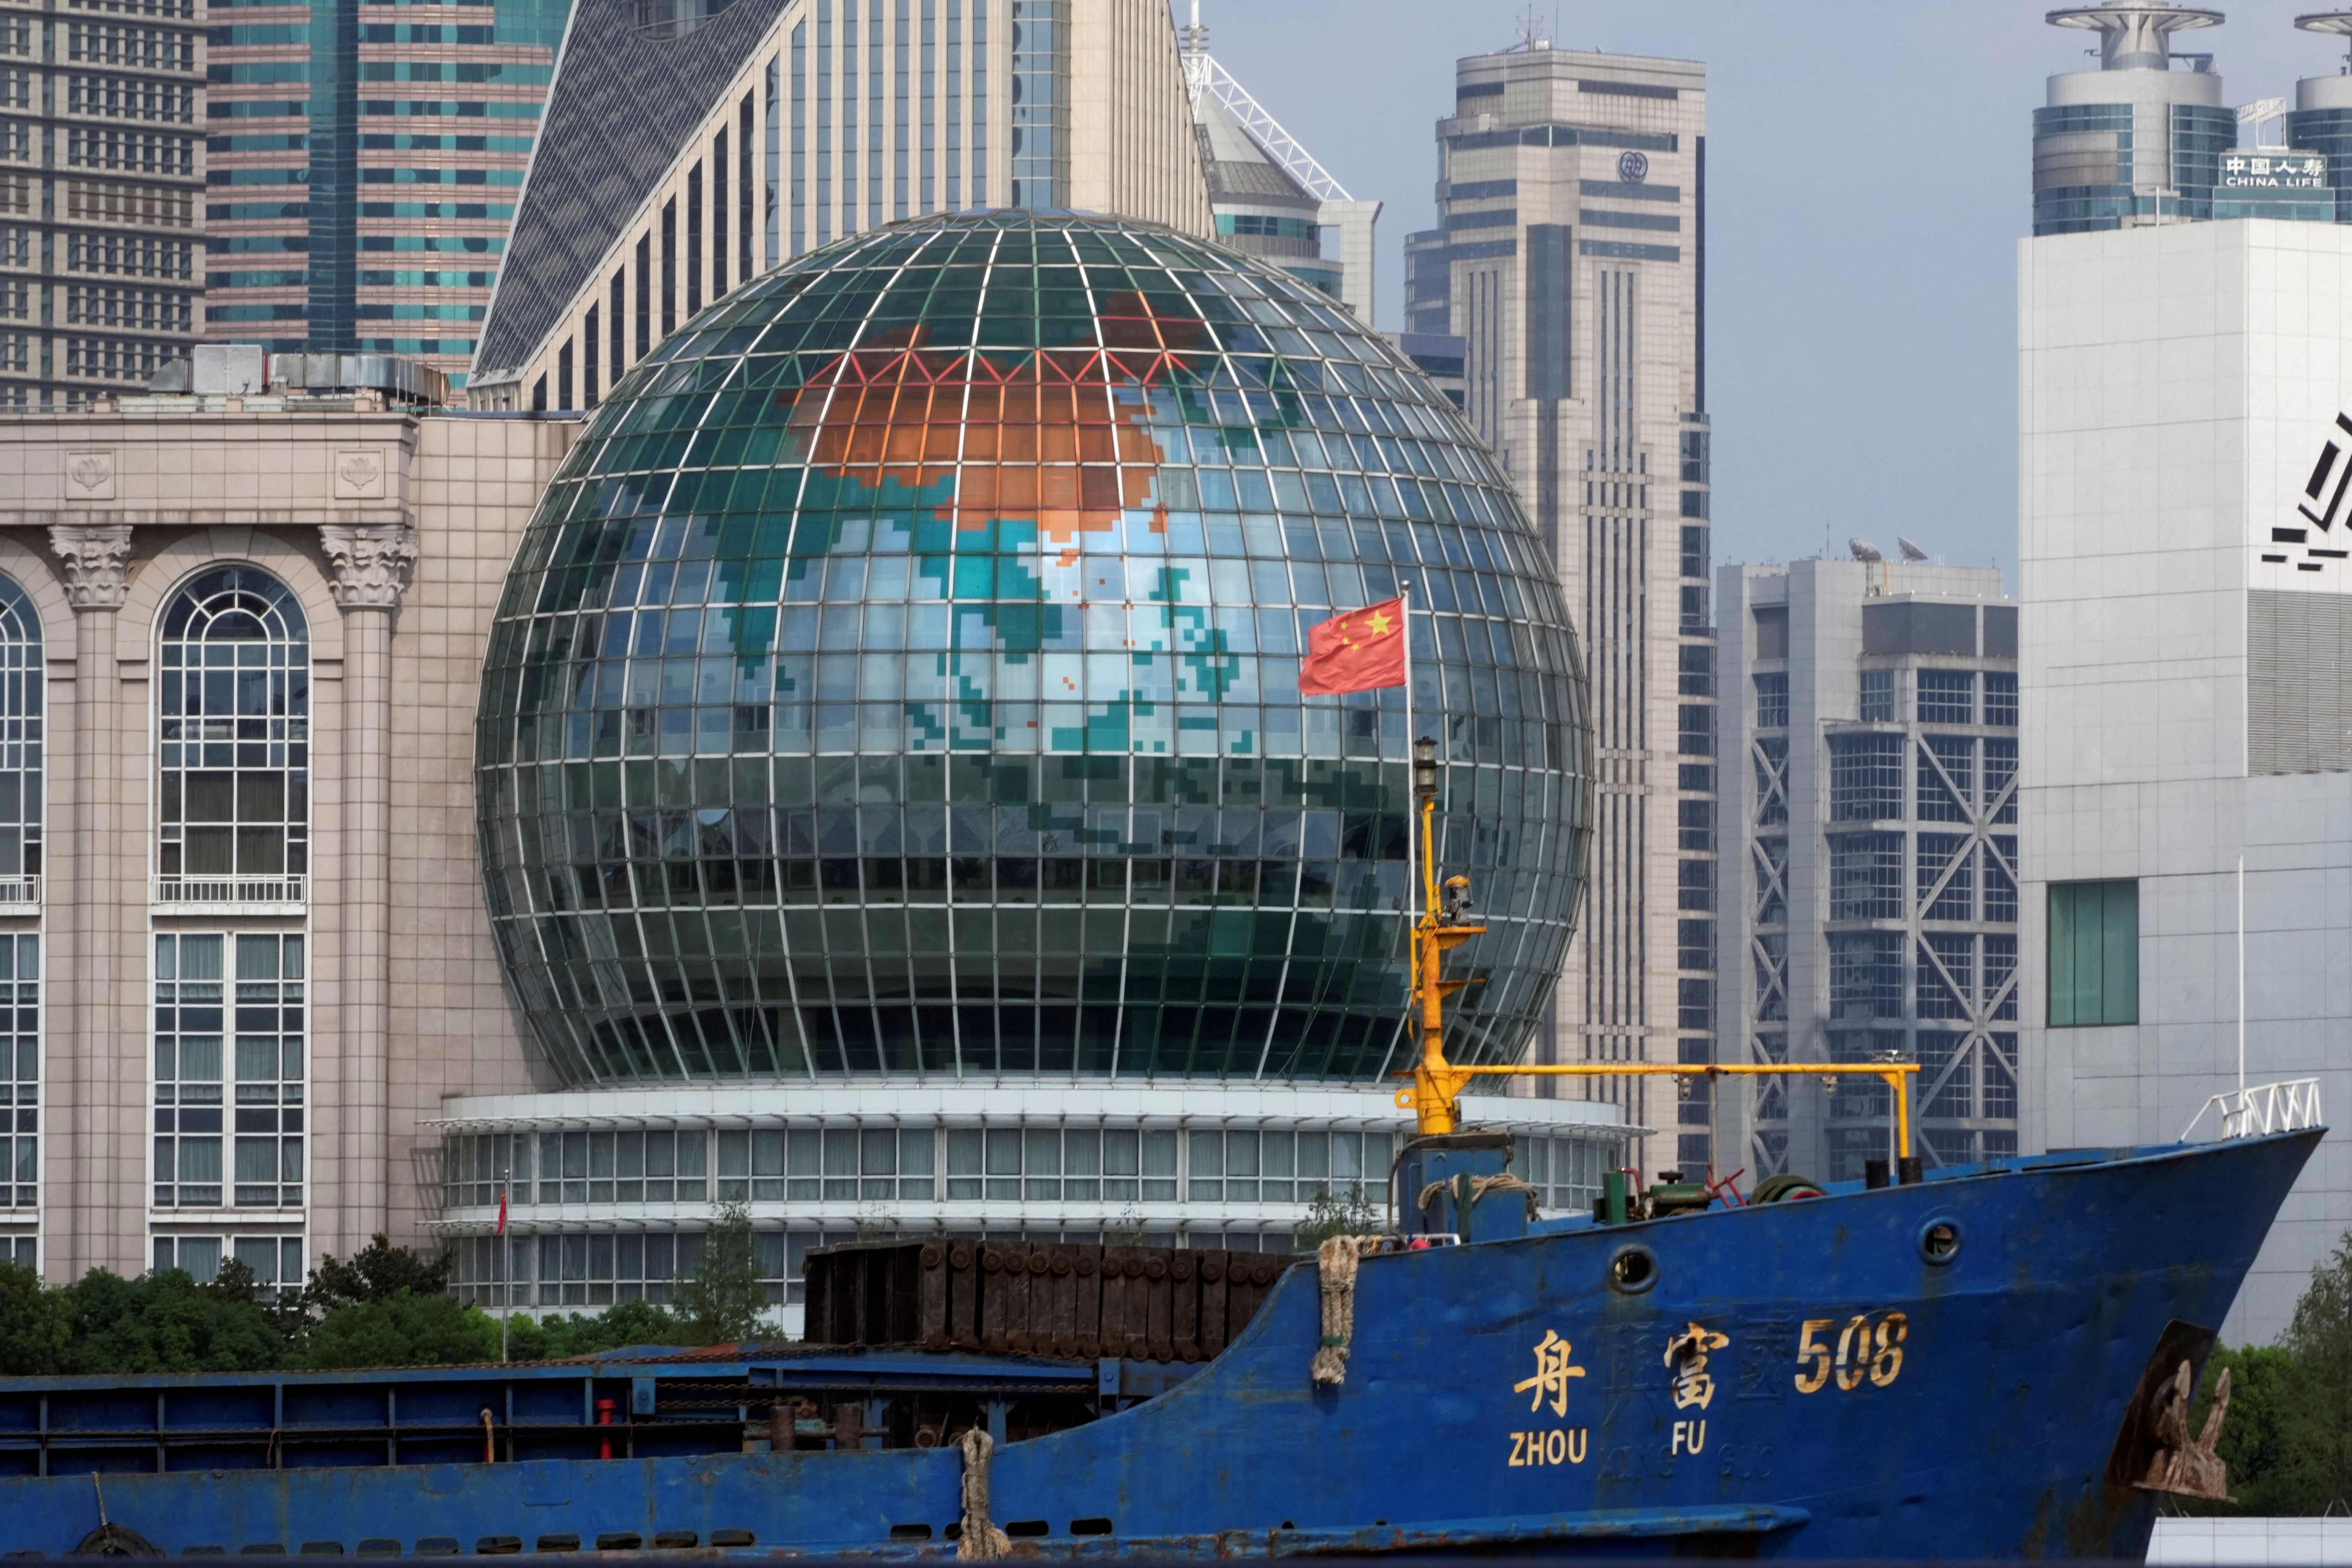 Chinese flag flutters on a ship in front of a globe in Shanghai